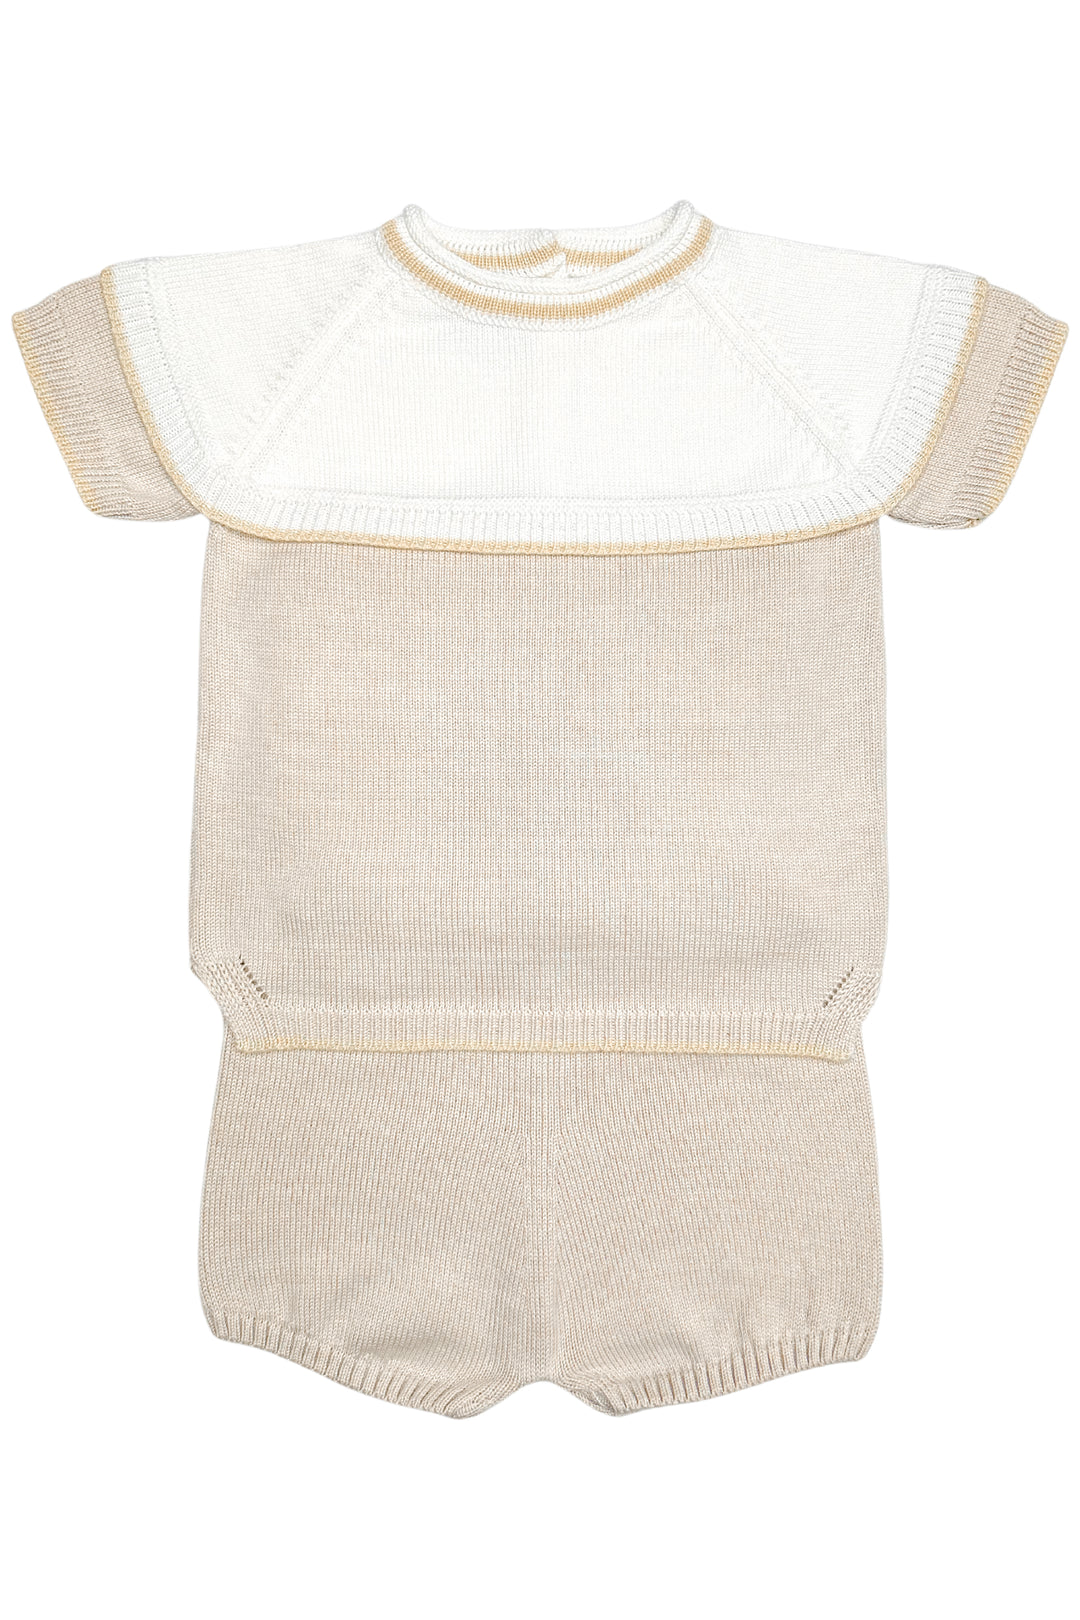 Granlei "Theo" Stone, Ivory & Beige Knit Top & Shorts | Millie and John